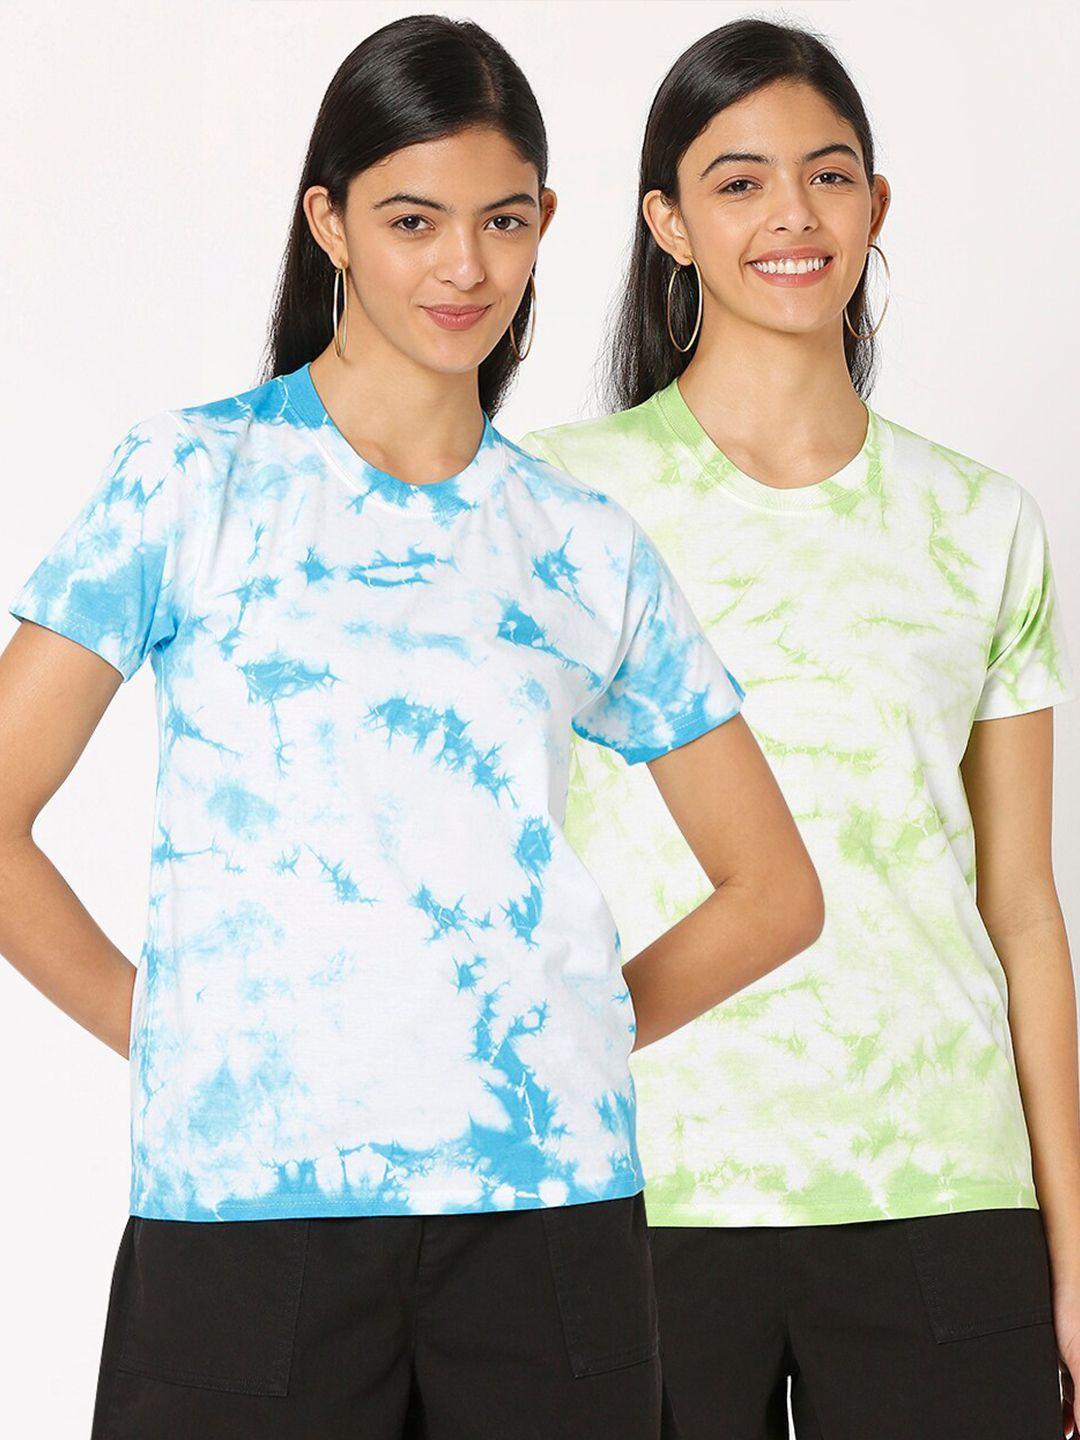 smarty pants women lime green & blue tie and dye set of 2 t-shirt